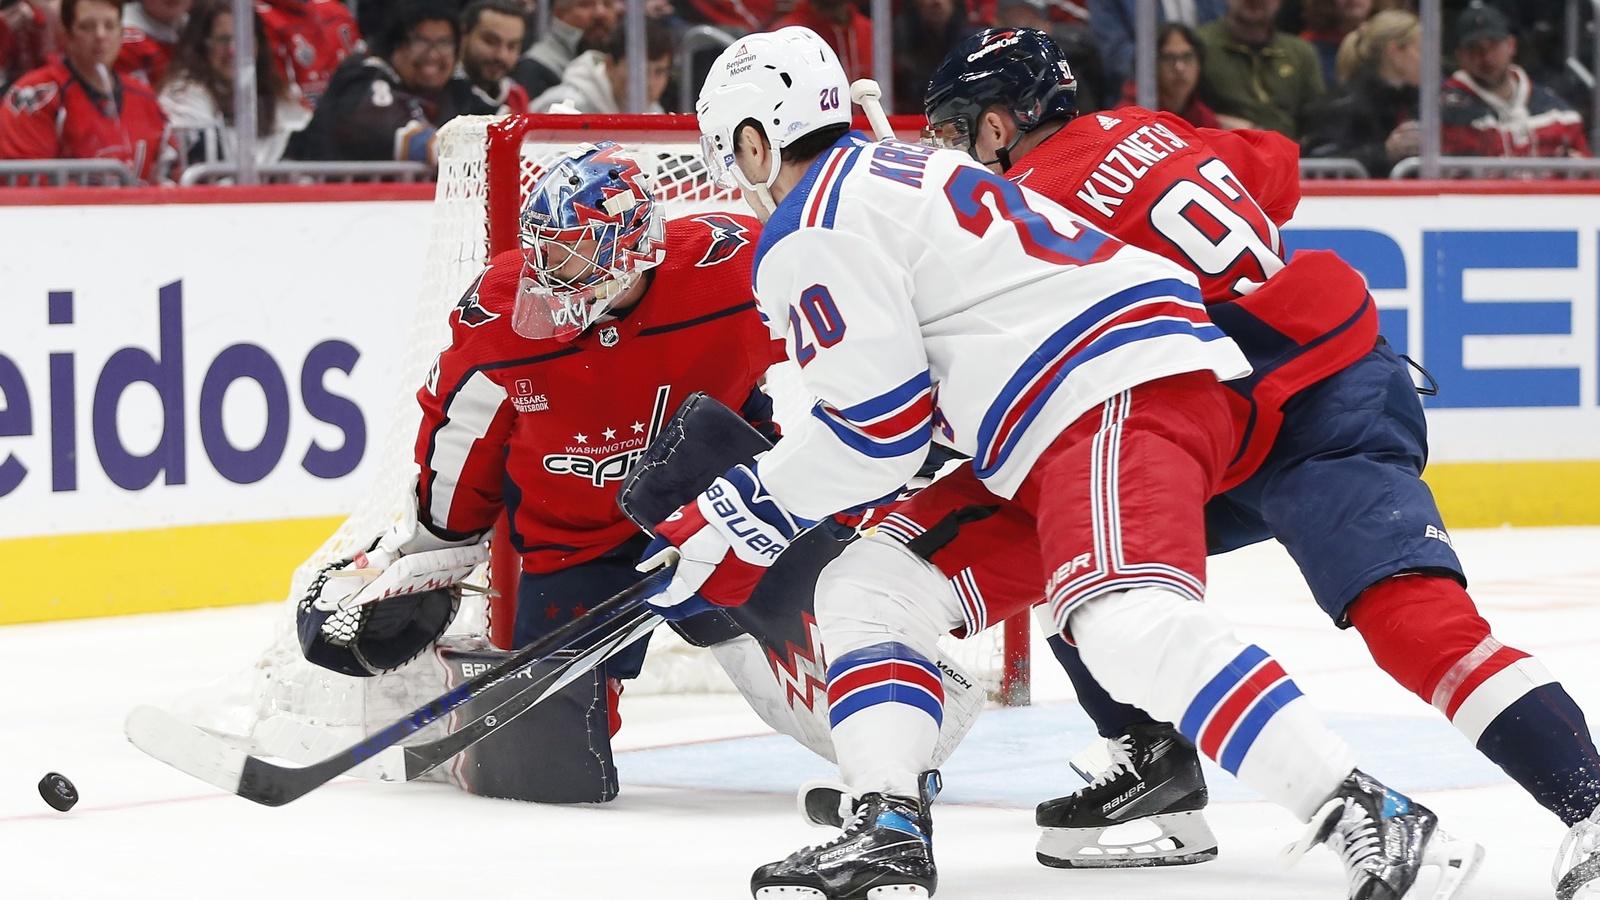 Washington Capitals goaltender Charlie Lindgren (79) watches the puck in front of New York Rangers left wing Chris Kreider (20) and Capitals center Evgeny Kuznetsov (92) during the second period at Capital One Arena. / Amber Searls-USA TODAY Sports